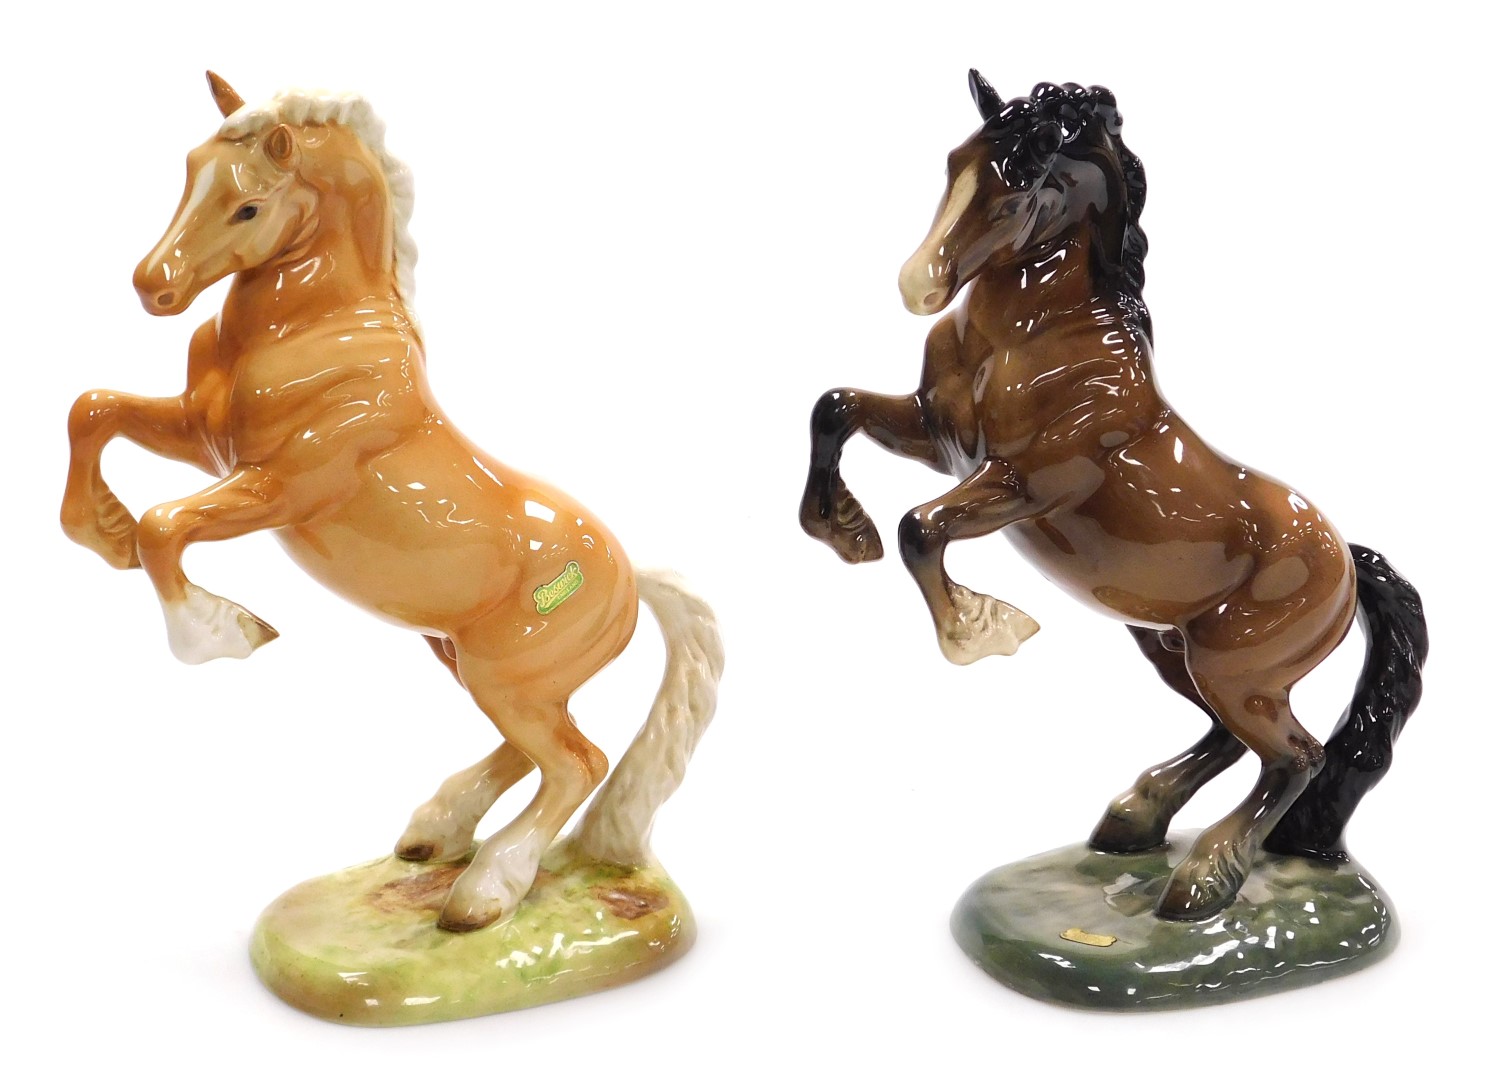 Two Beswick pottery figures of rearing horses, model number 1015, one Palomino, the other brown glos